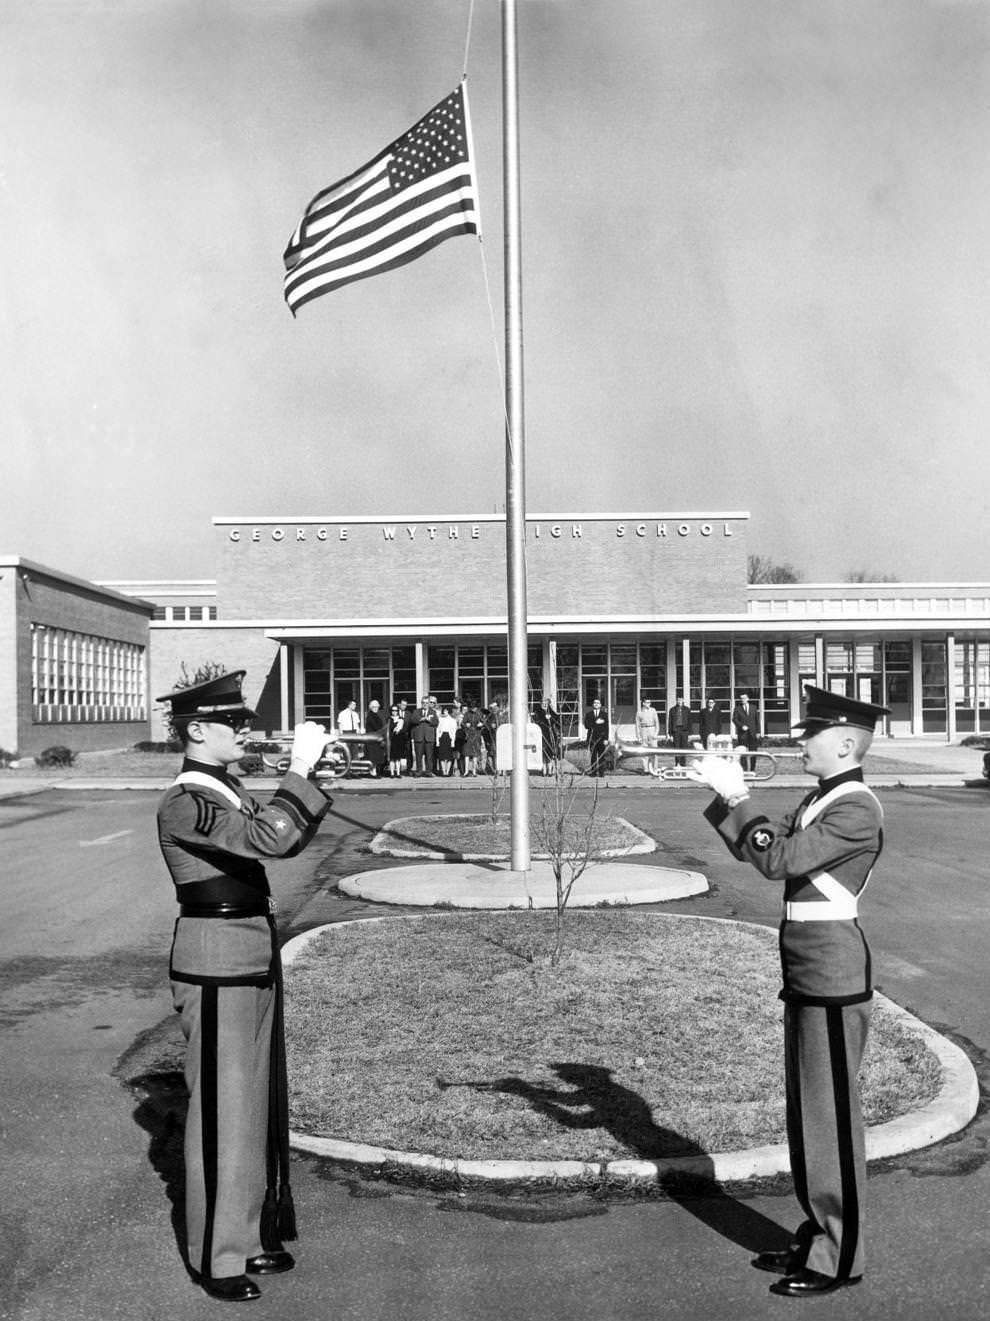 Victor Tomlinson (left) and William Hudson of the George Wythe High School cadet corps in Richmond blew taps while the school’s American flag flew at half-staff in honor of Winston Churchill, who died a day earlier. Gov. Albertis S. Harrison called for the weeklong recognition to mourn Britain’s World War II-era leader.